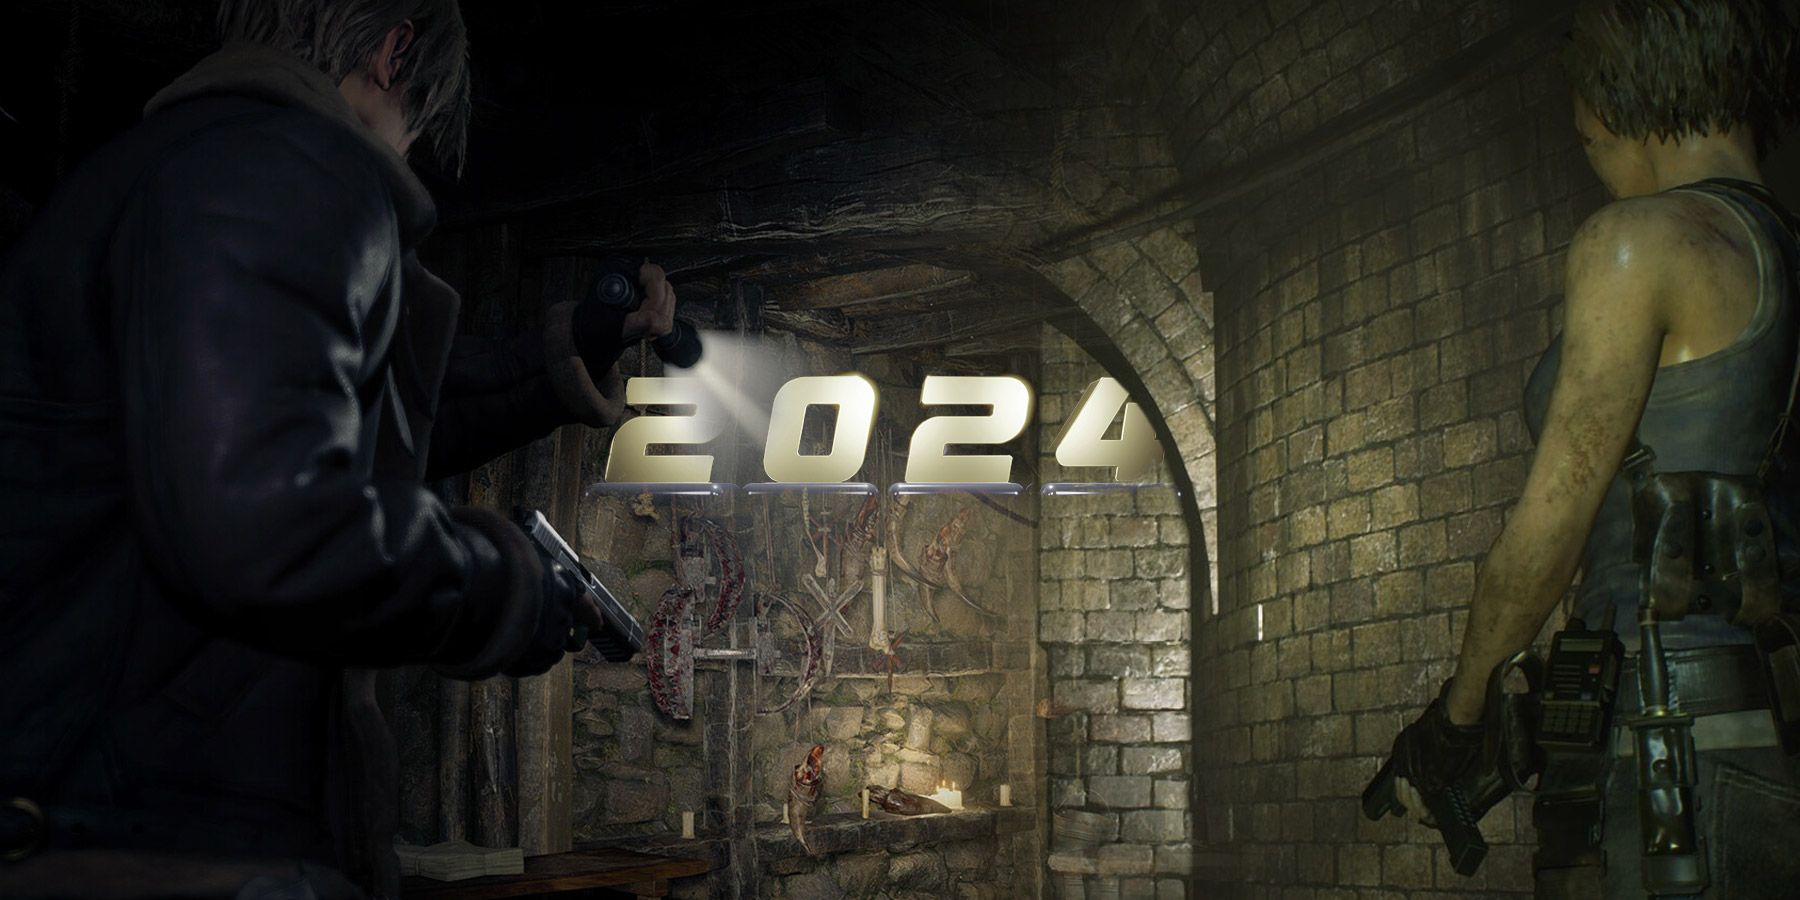 Resident Evil Remakes Not Coming in 2024; CAPCOM to Announce Big Game  Before Year's End